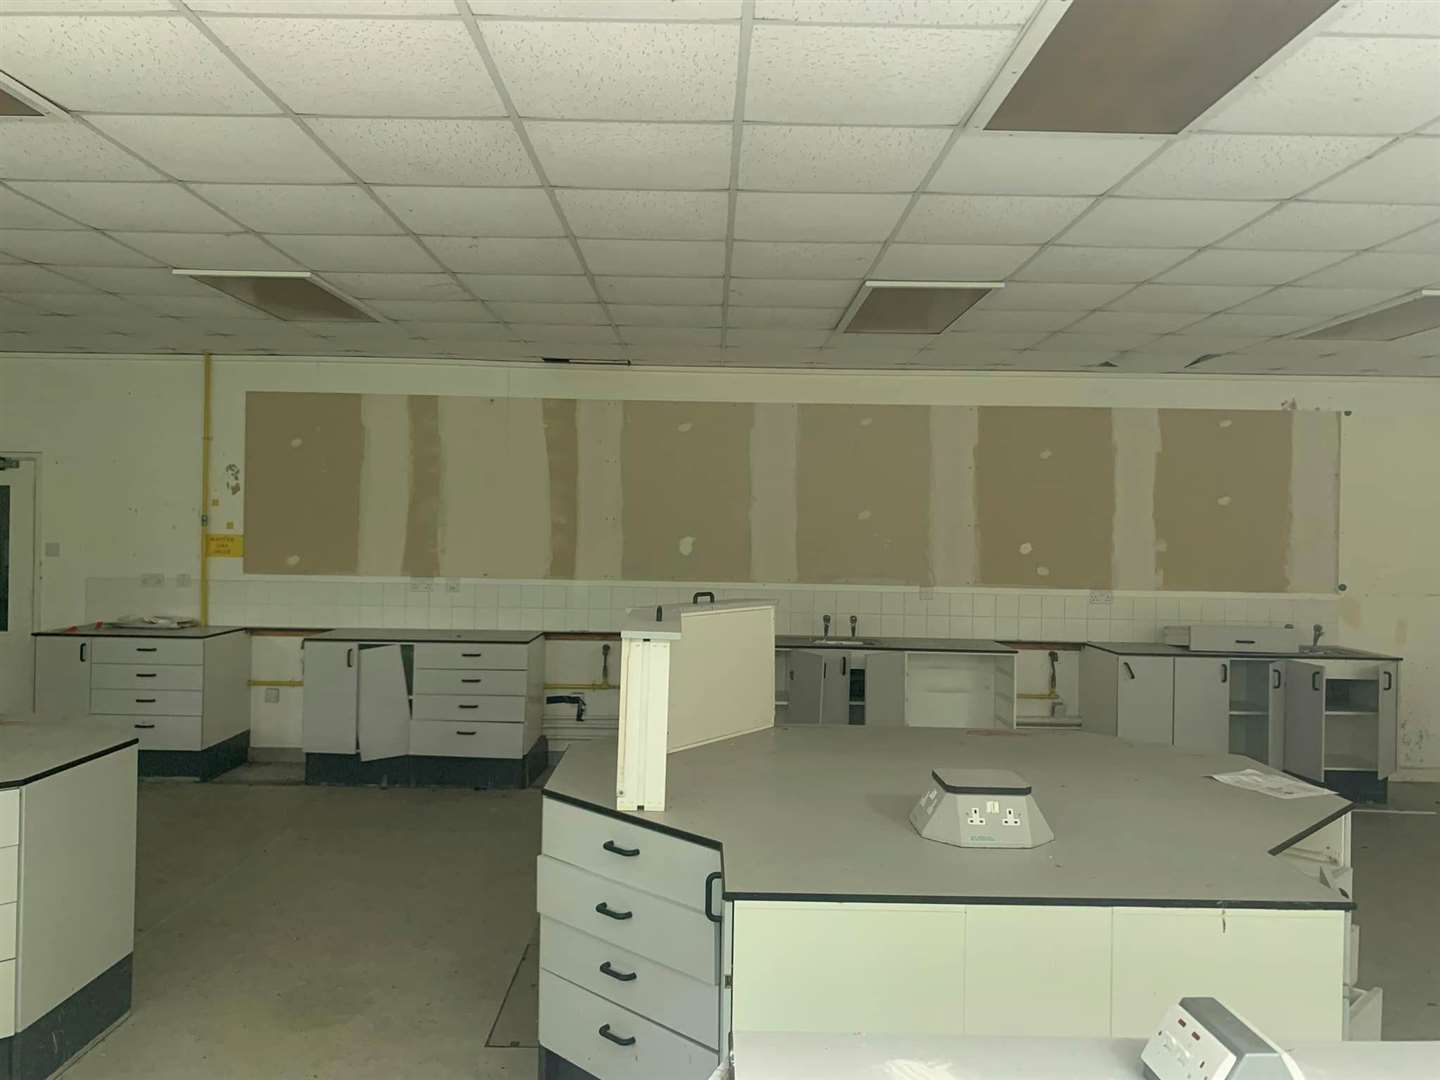 Displays have been stripped off the walls which are left bare